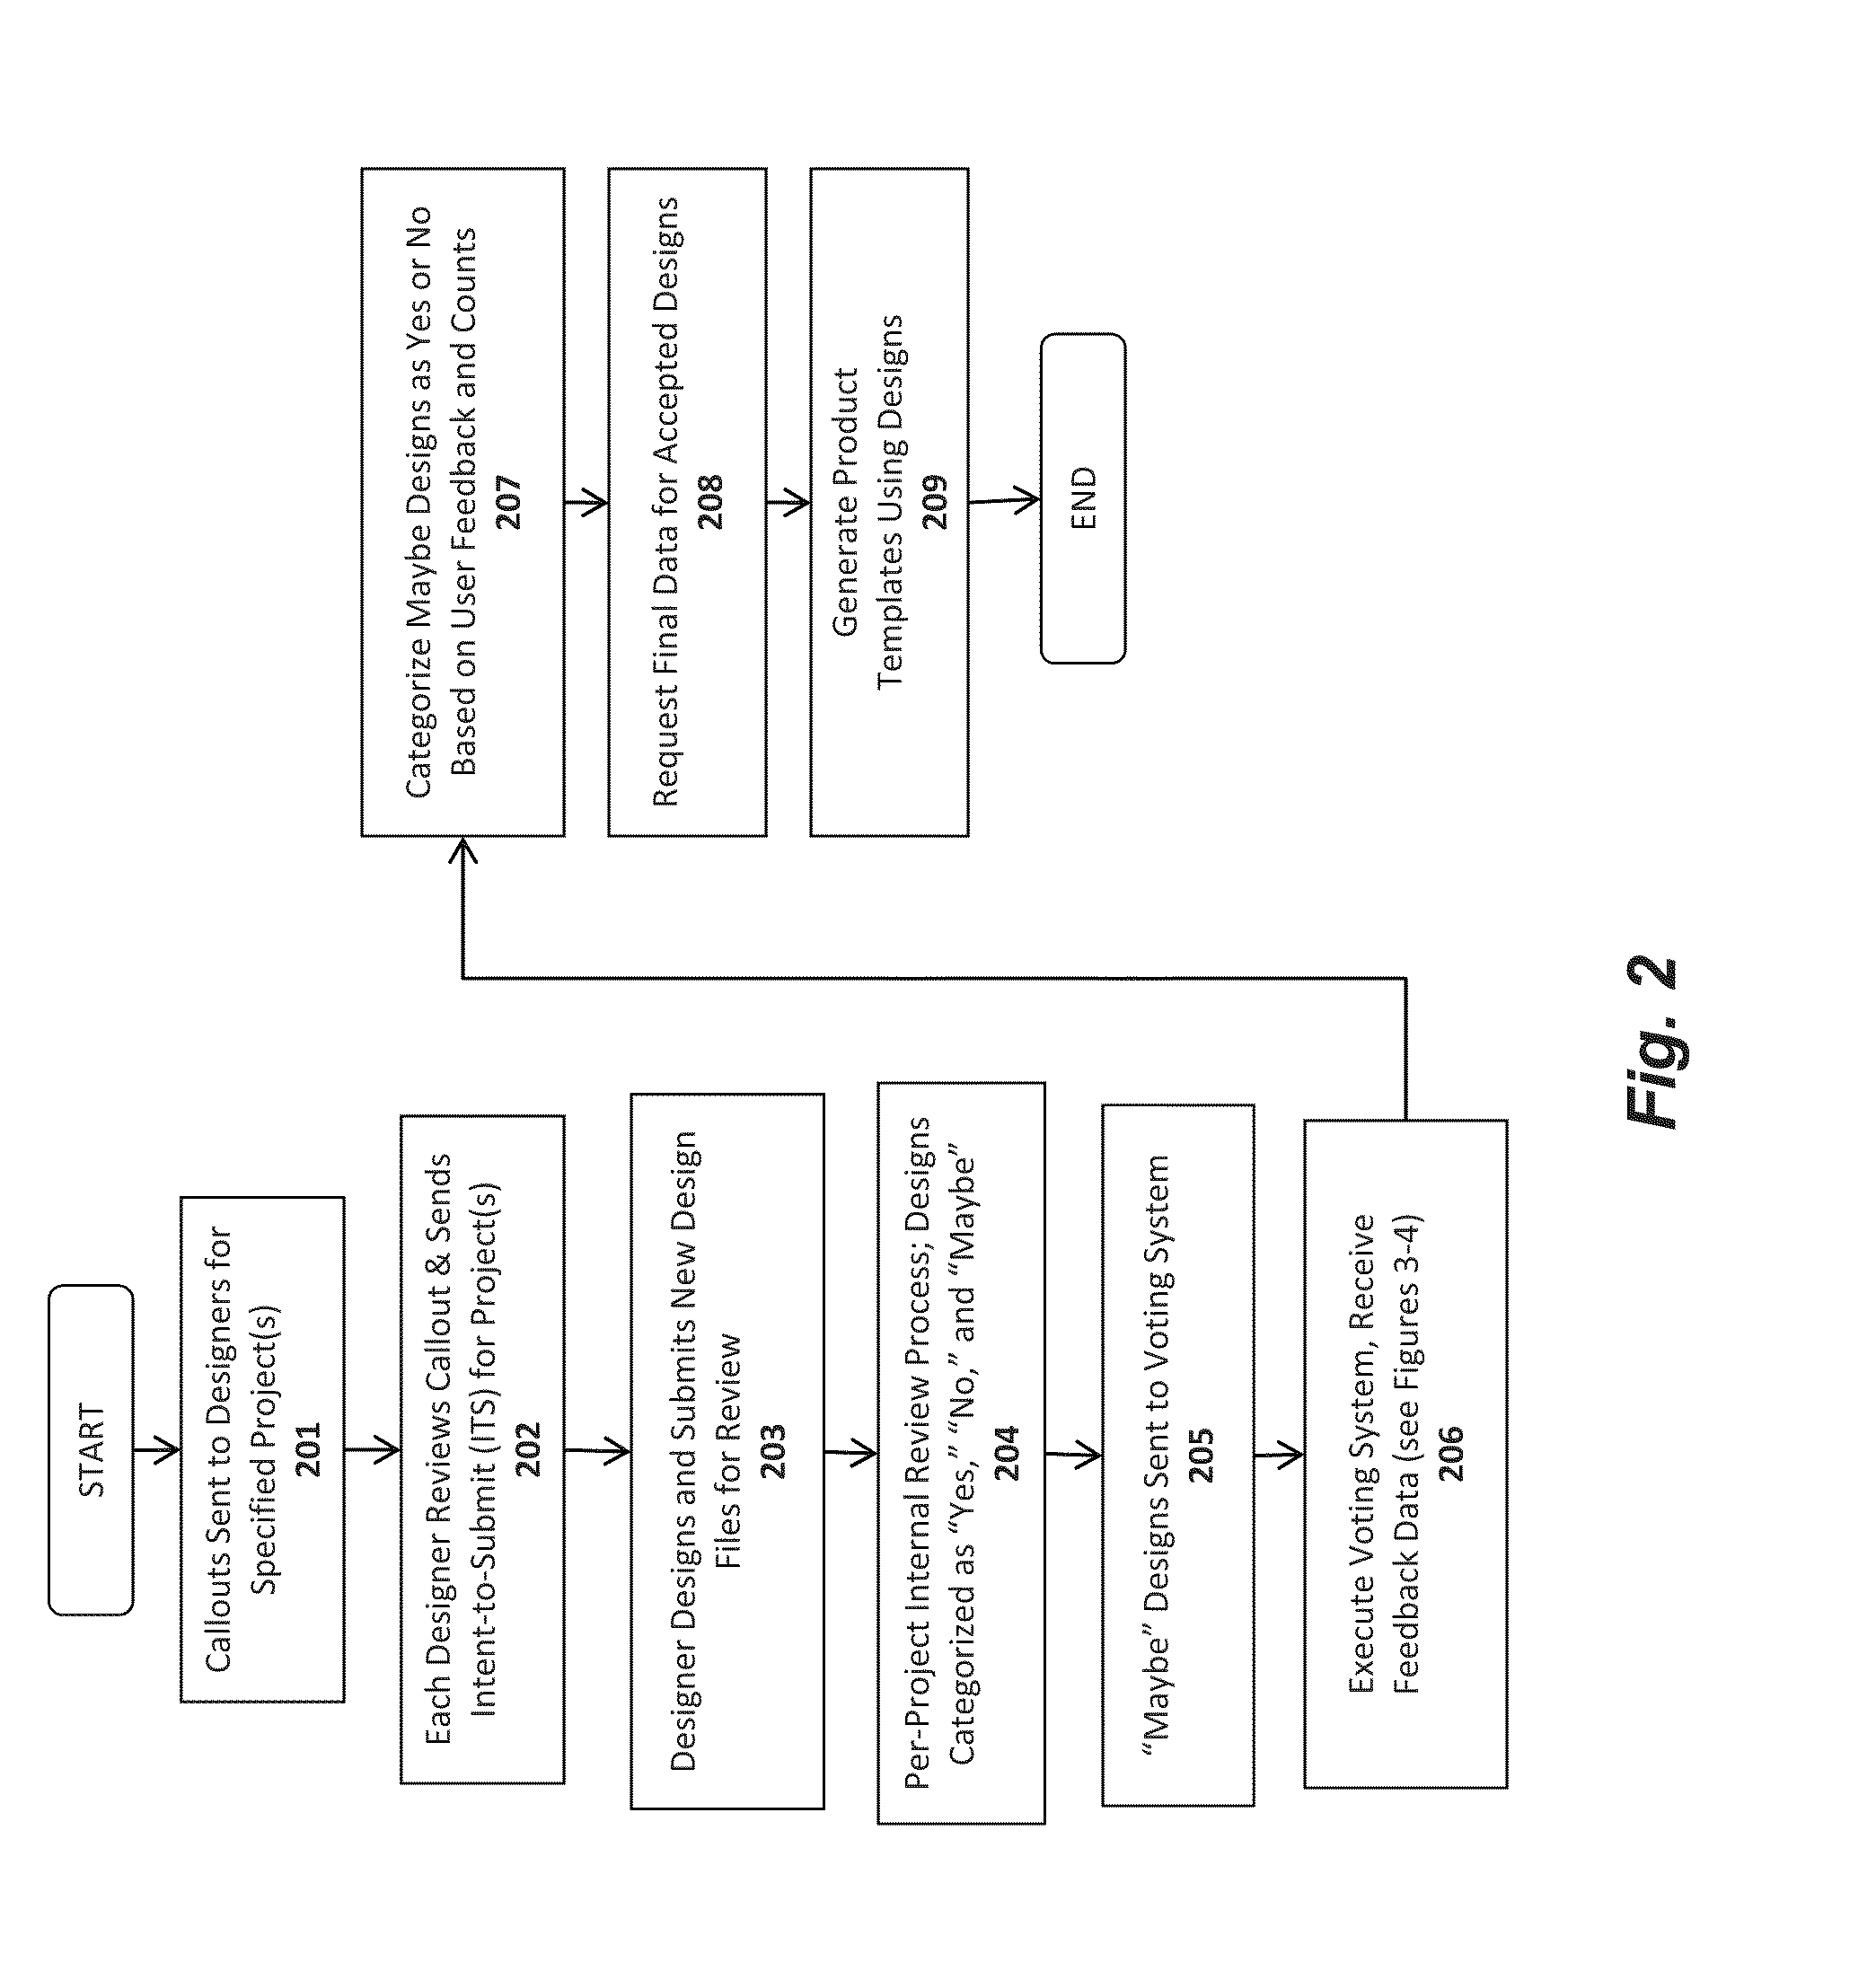 System and method for collecting end user feedback for stationery designs